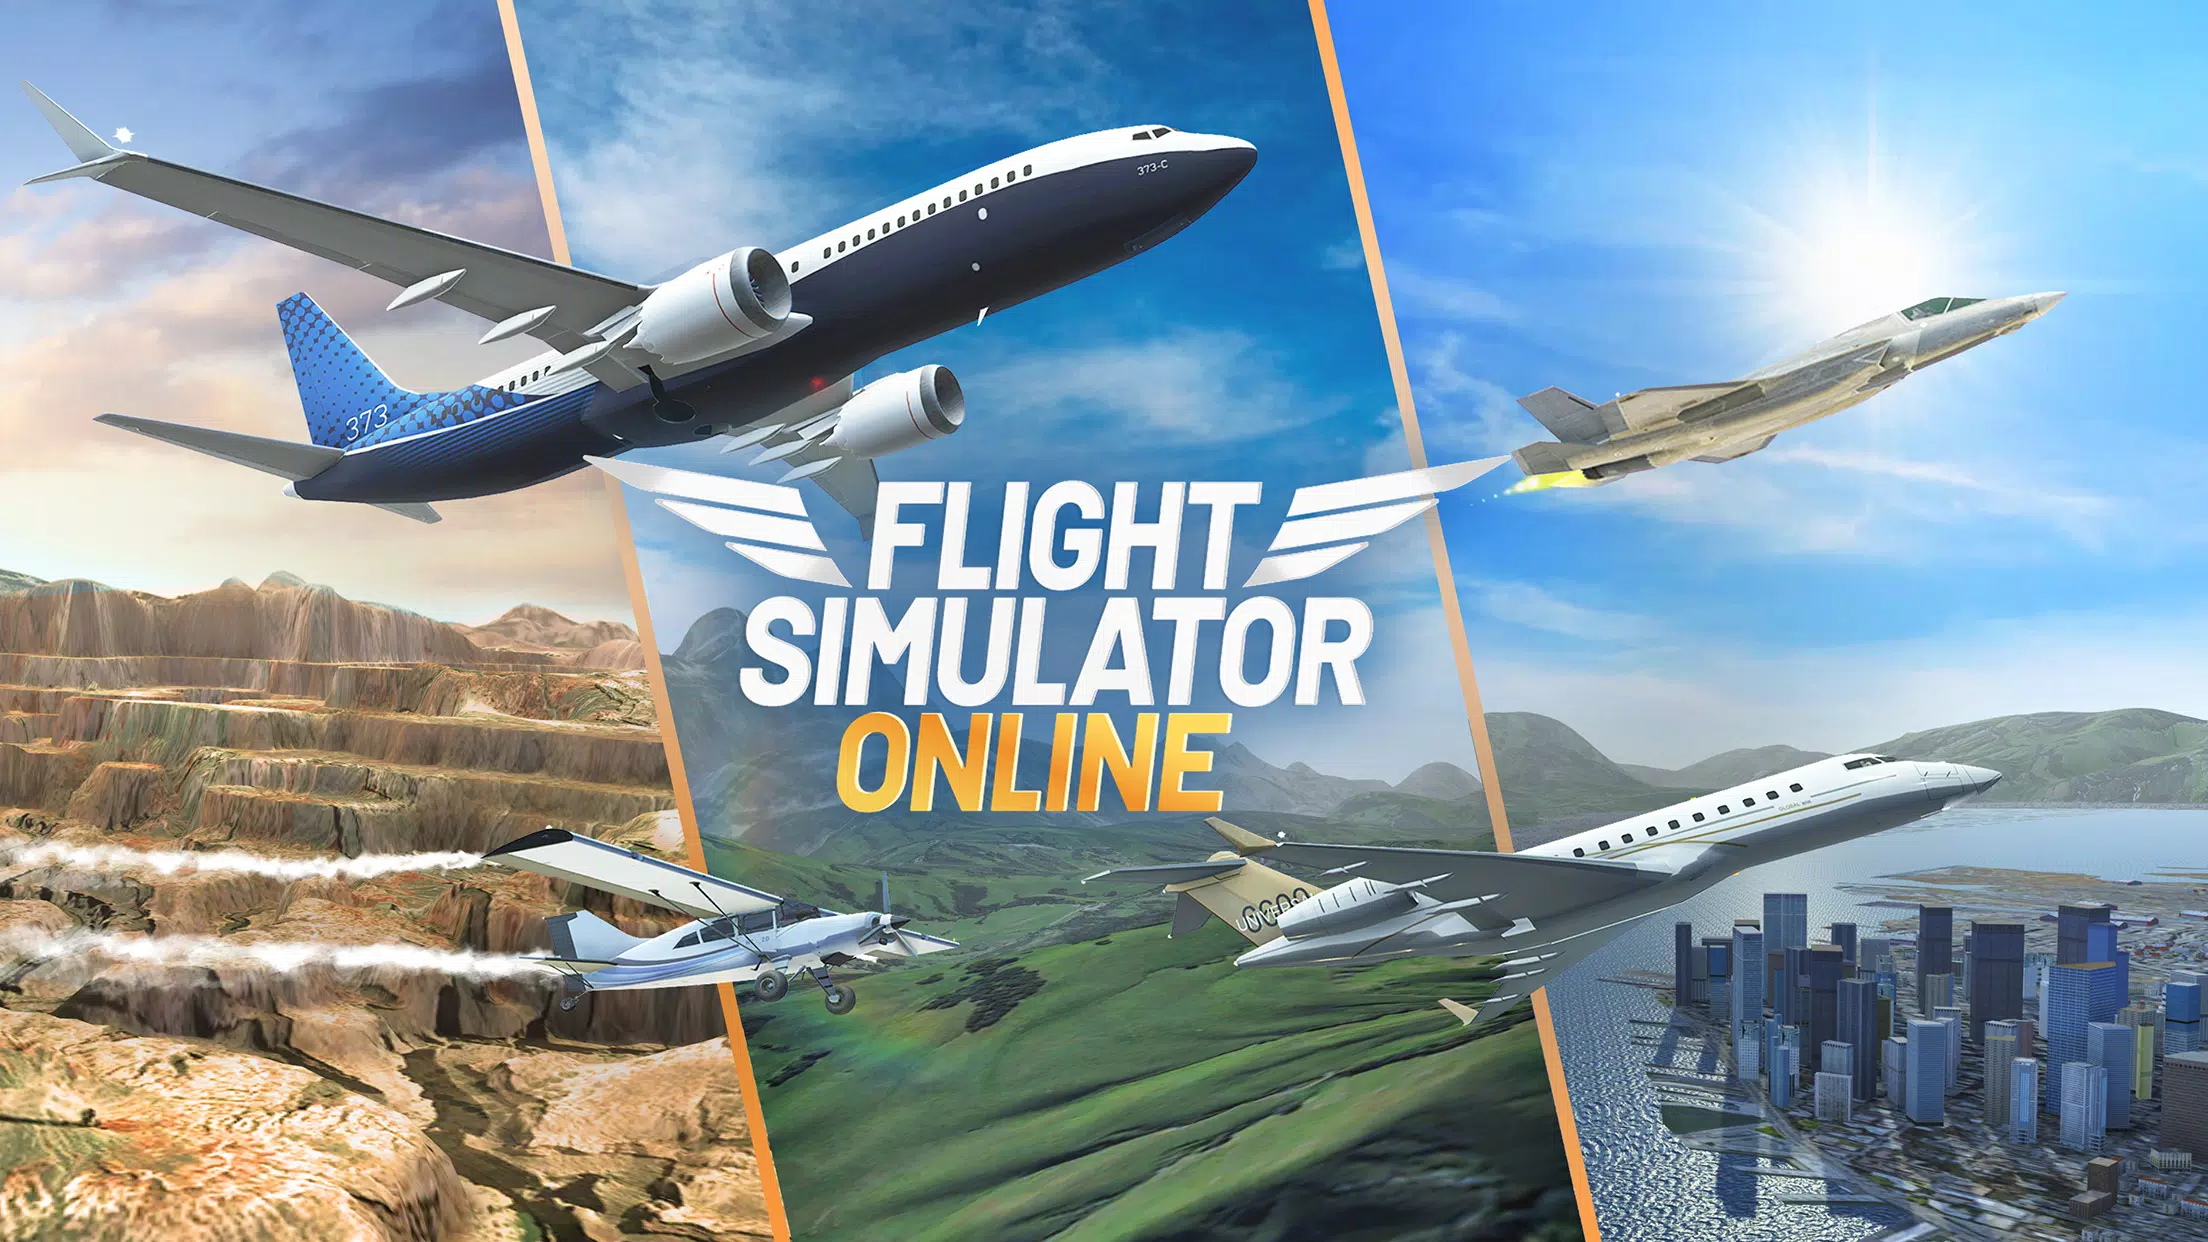 Microsoft Flight Simulator Mobile - How to play on an Android or